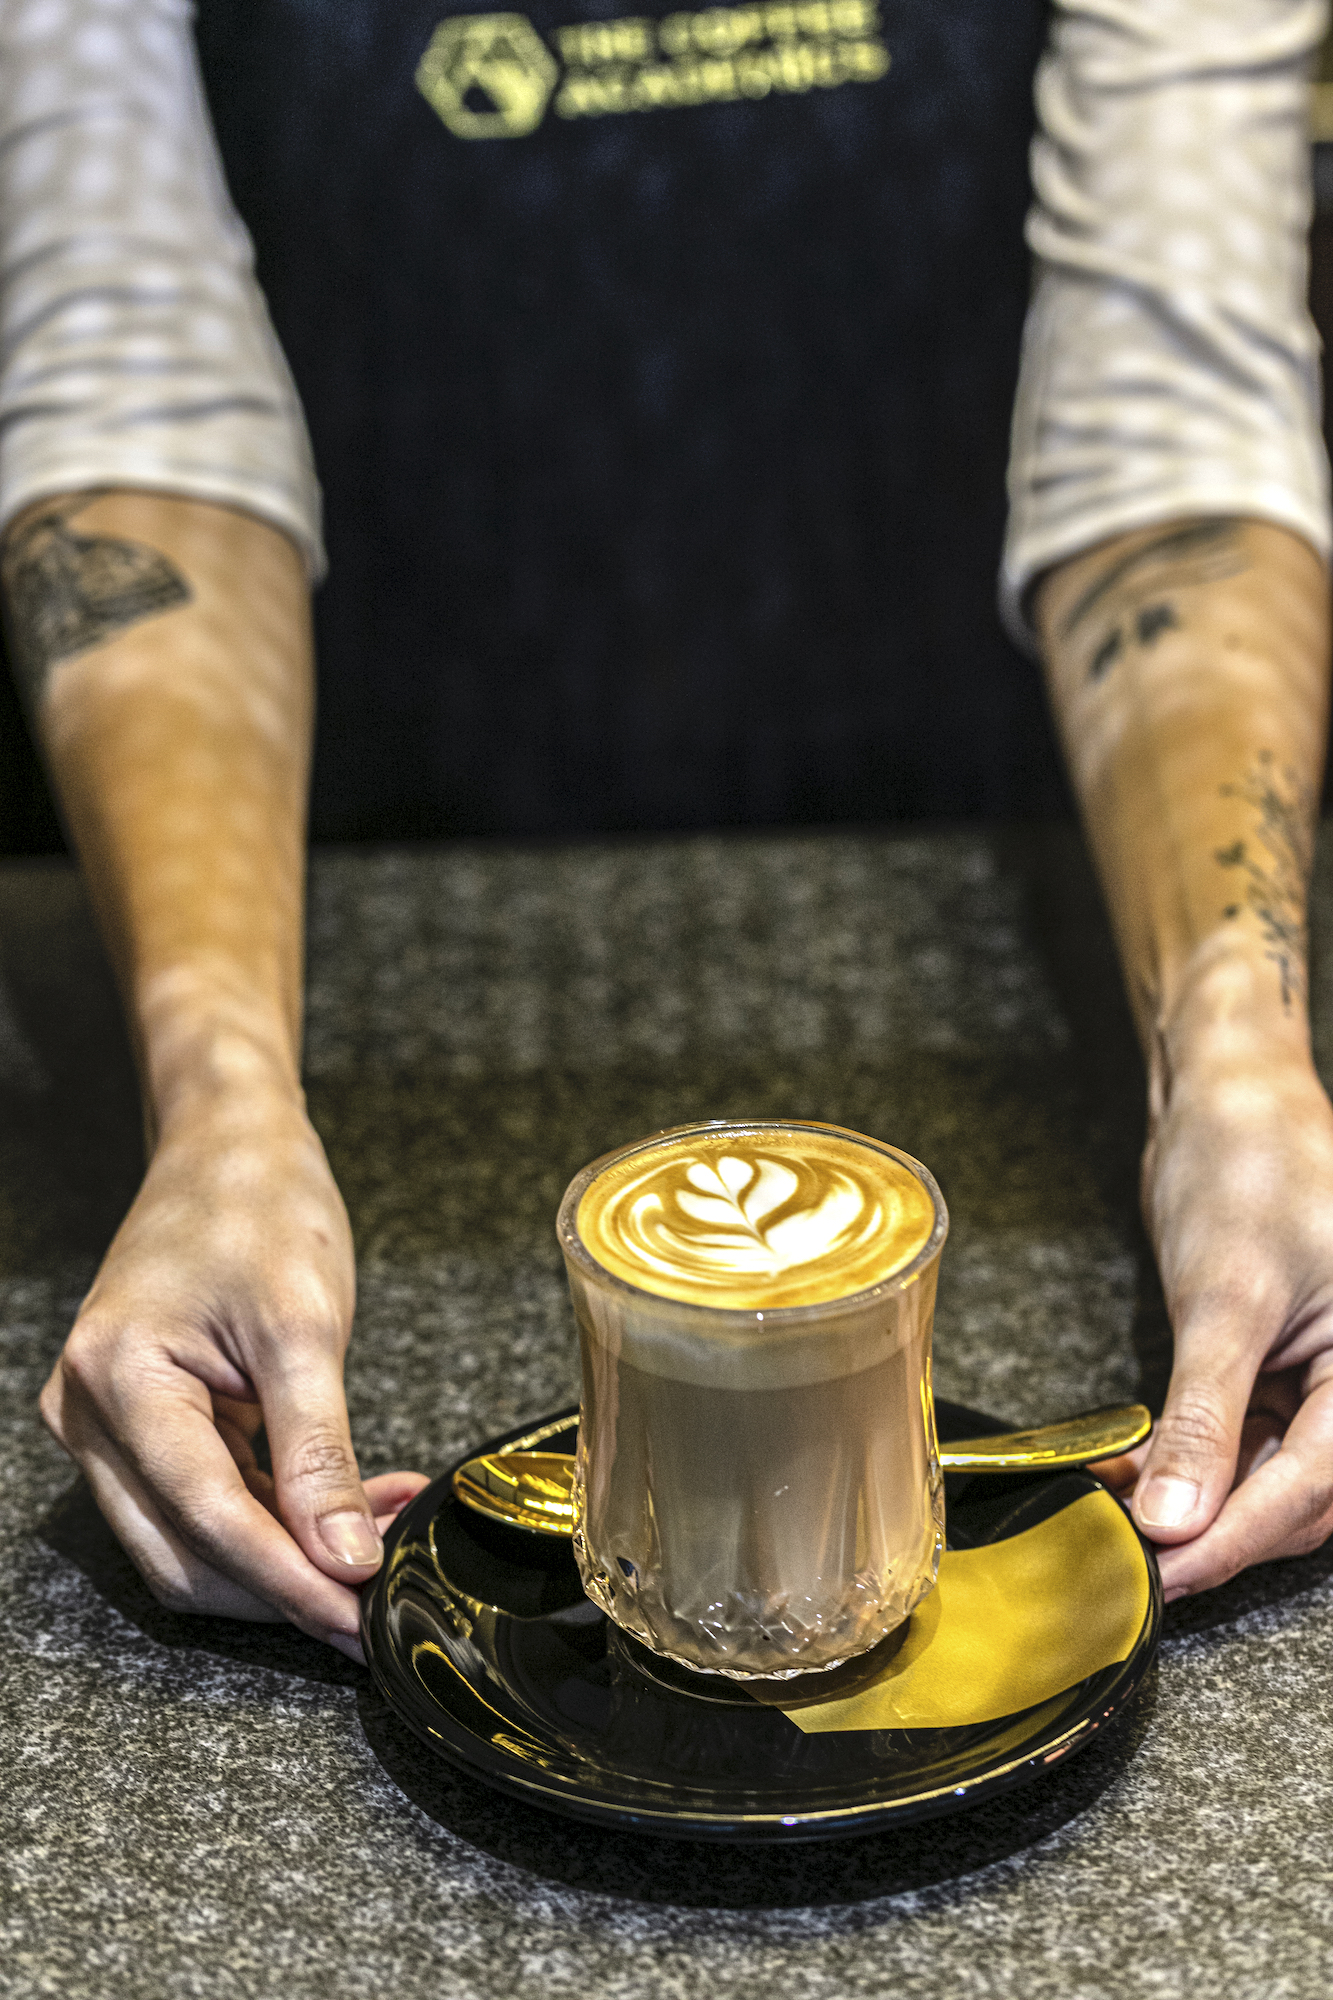  Myles Hontiveros of Coffee Academics believes people are looking for unique drinks such as their signature lattes, but will soon return to basics such as this flat white